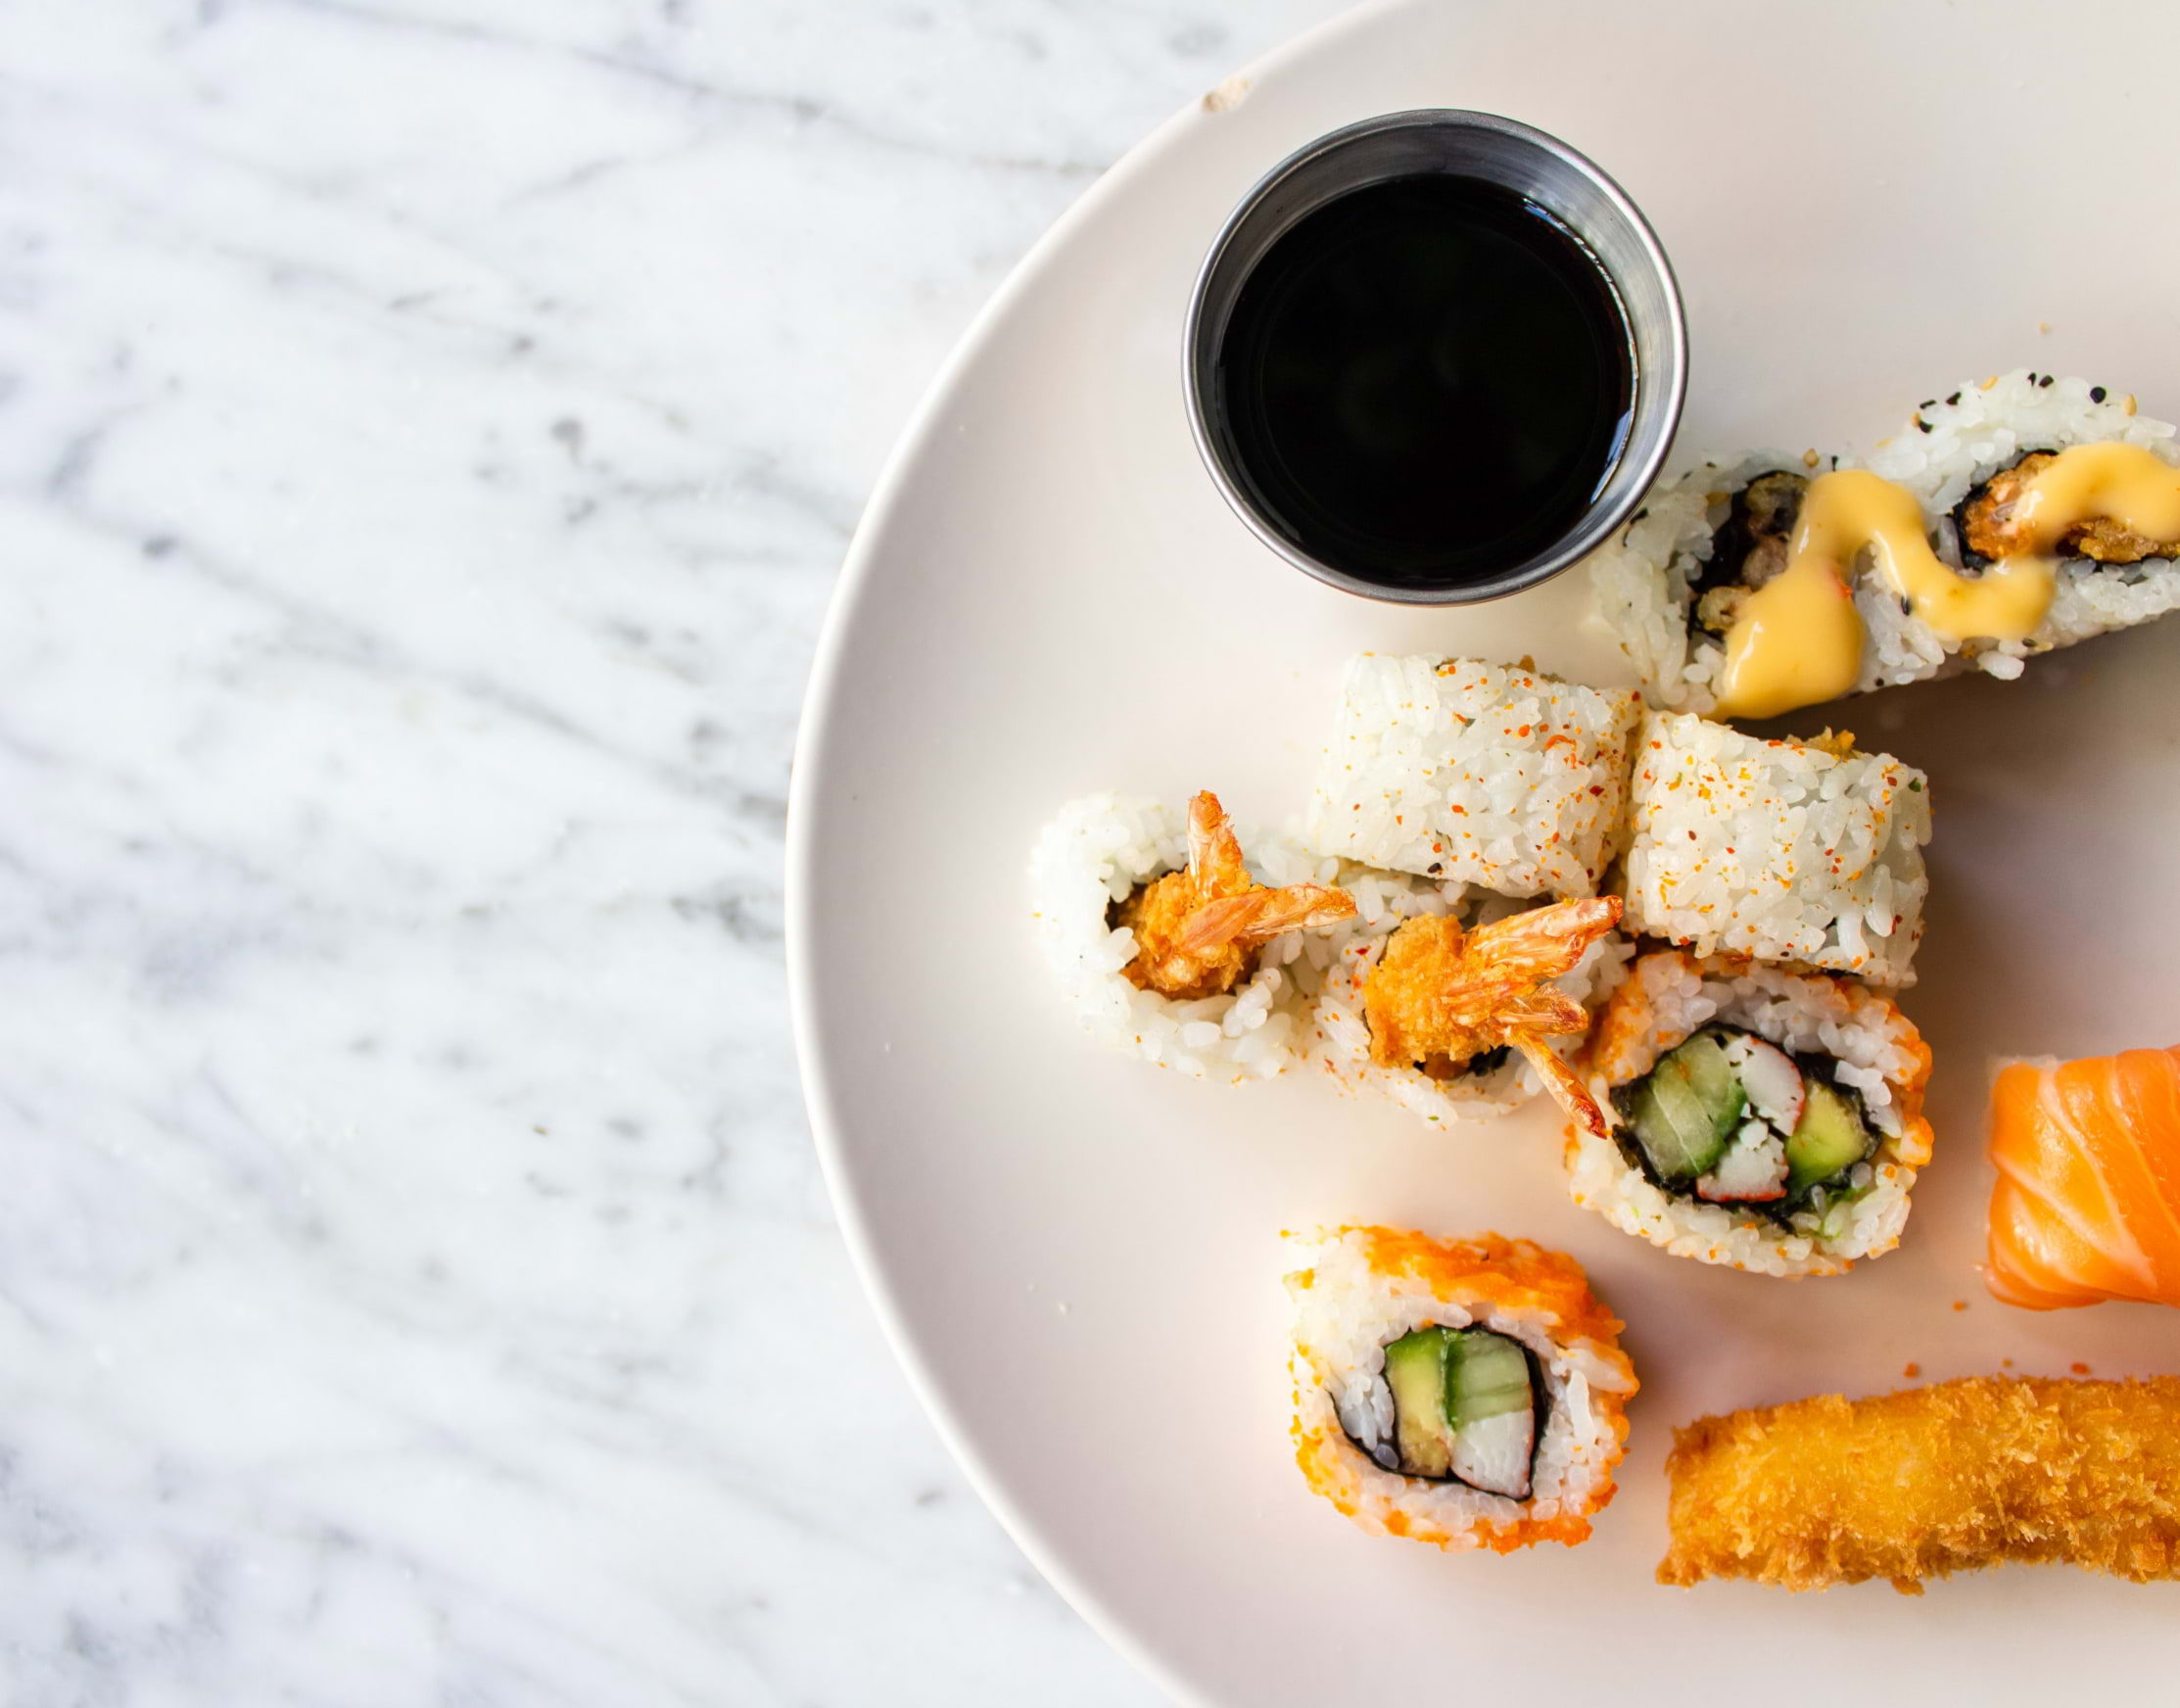 Get 25% off at this new Japanese restaurant until 30th September